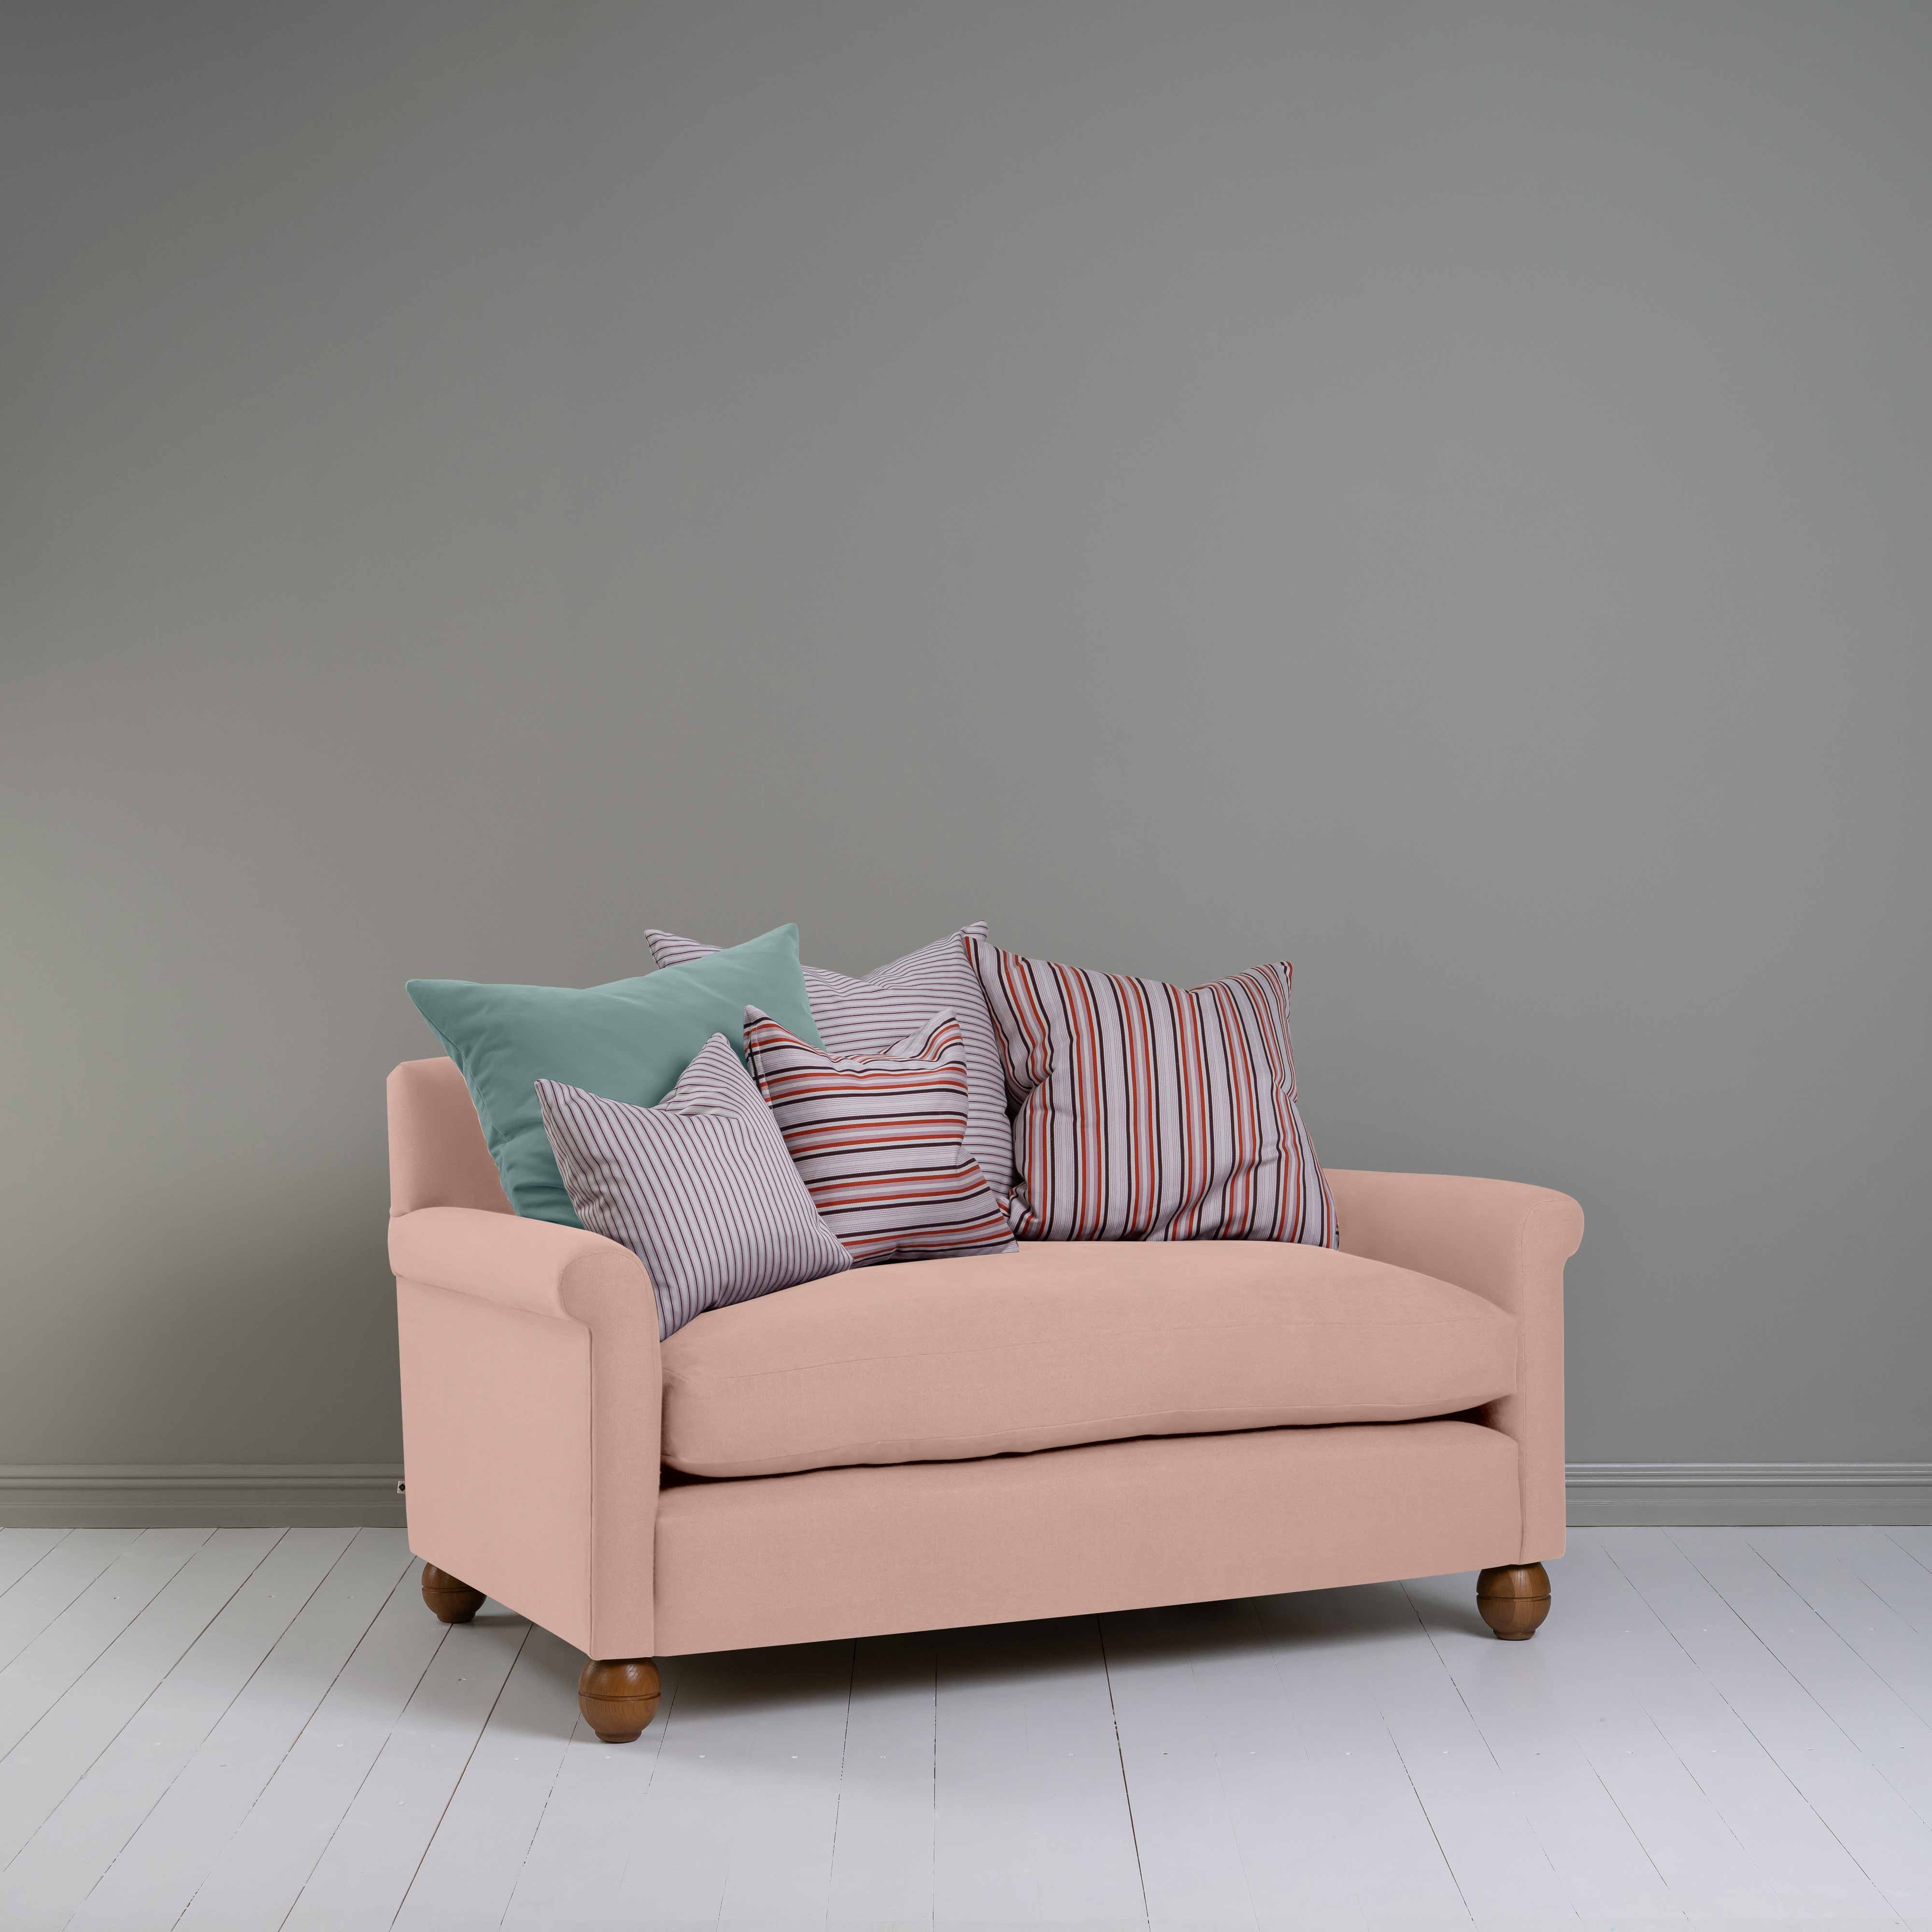  Idler 2 Seater Sofa in Laidback Linen Dusky Pink 